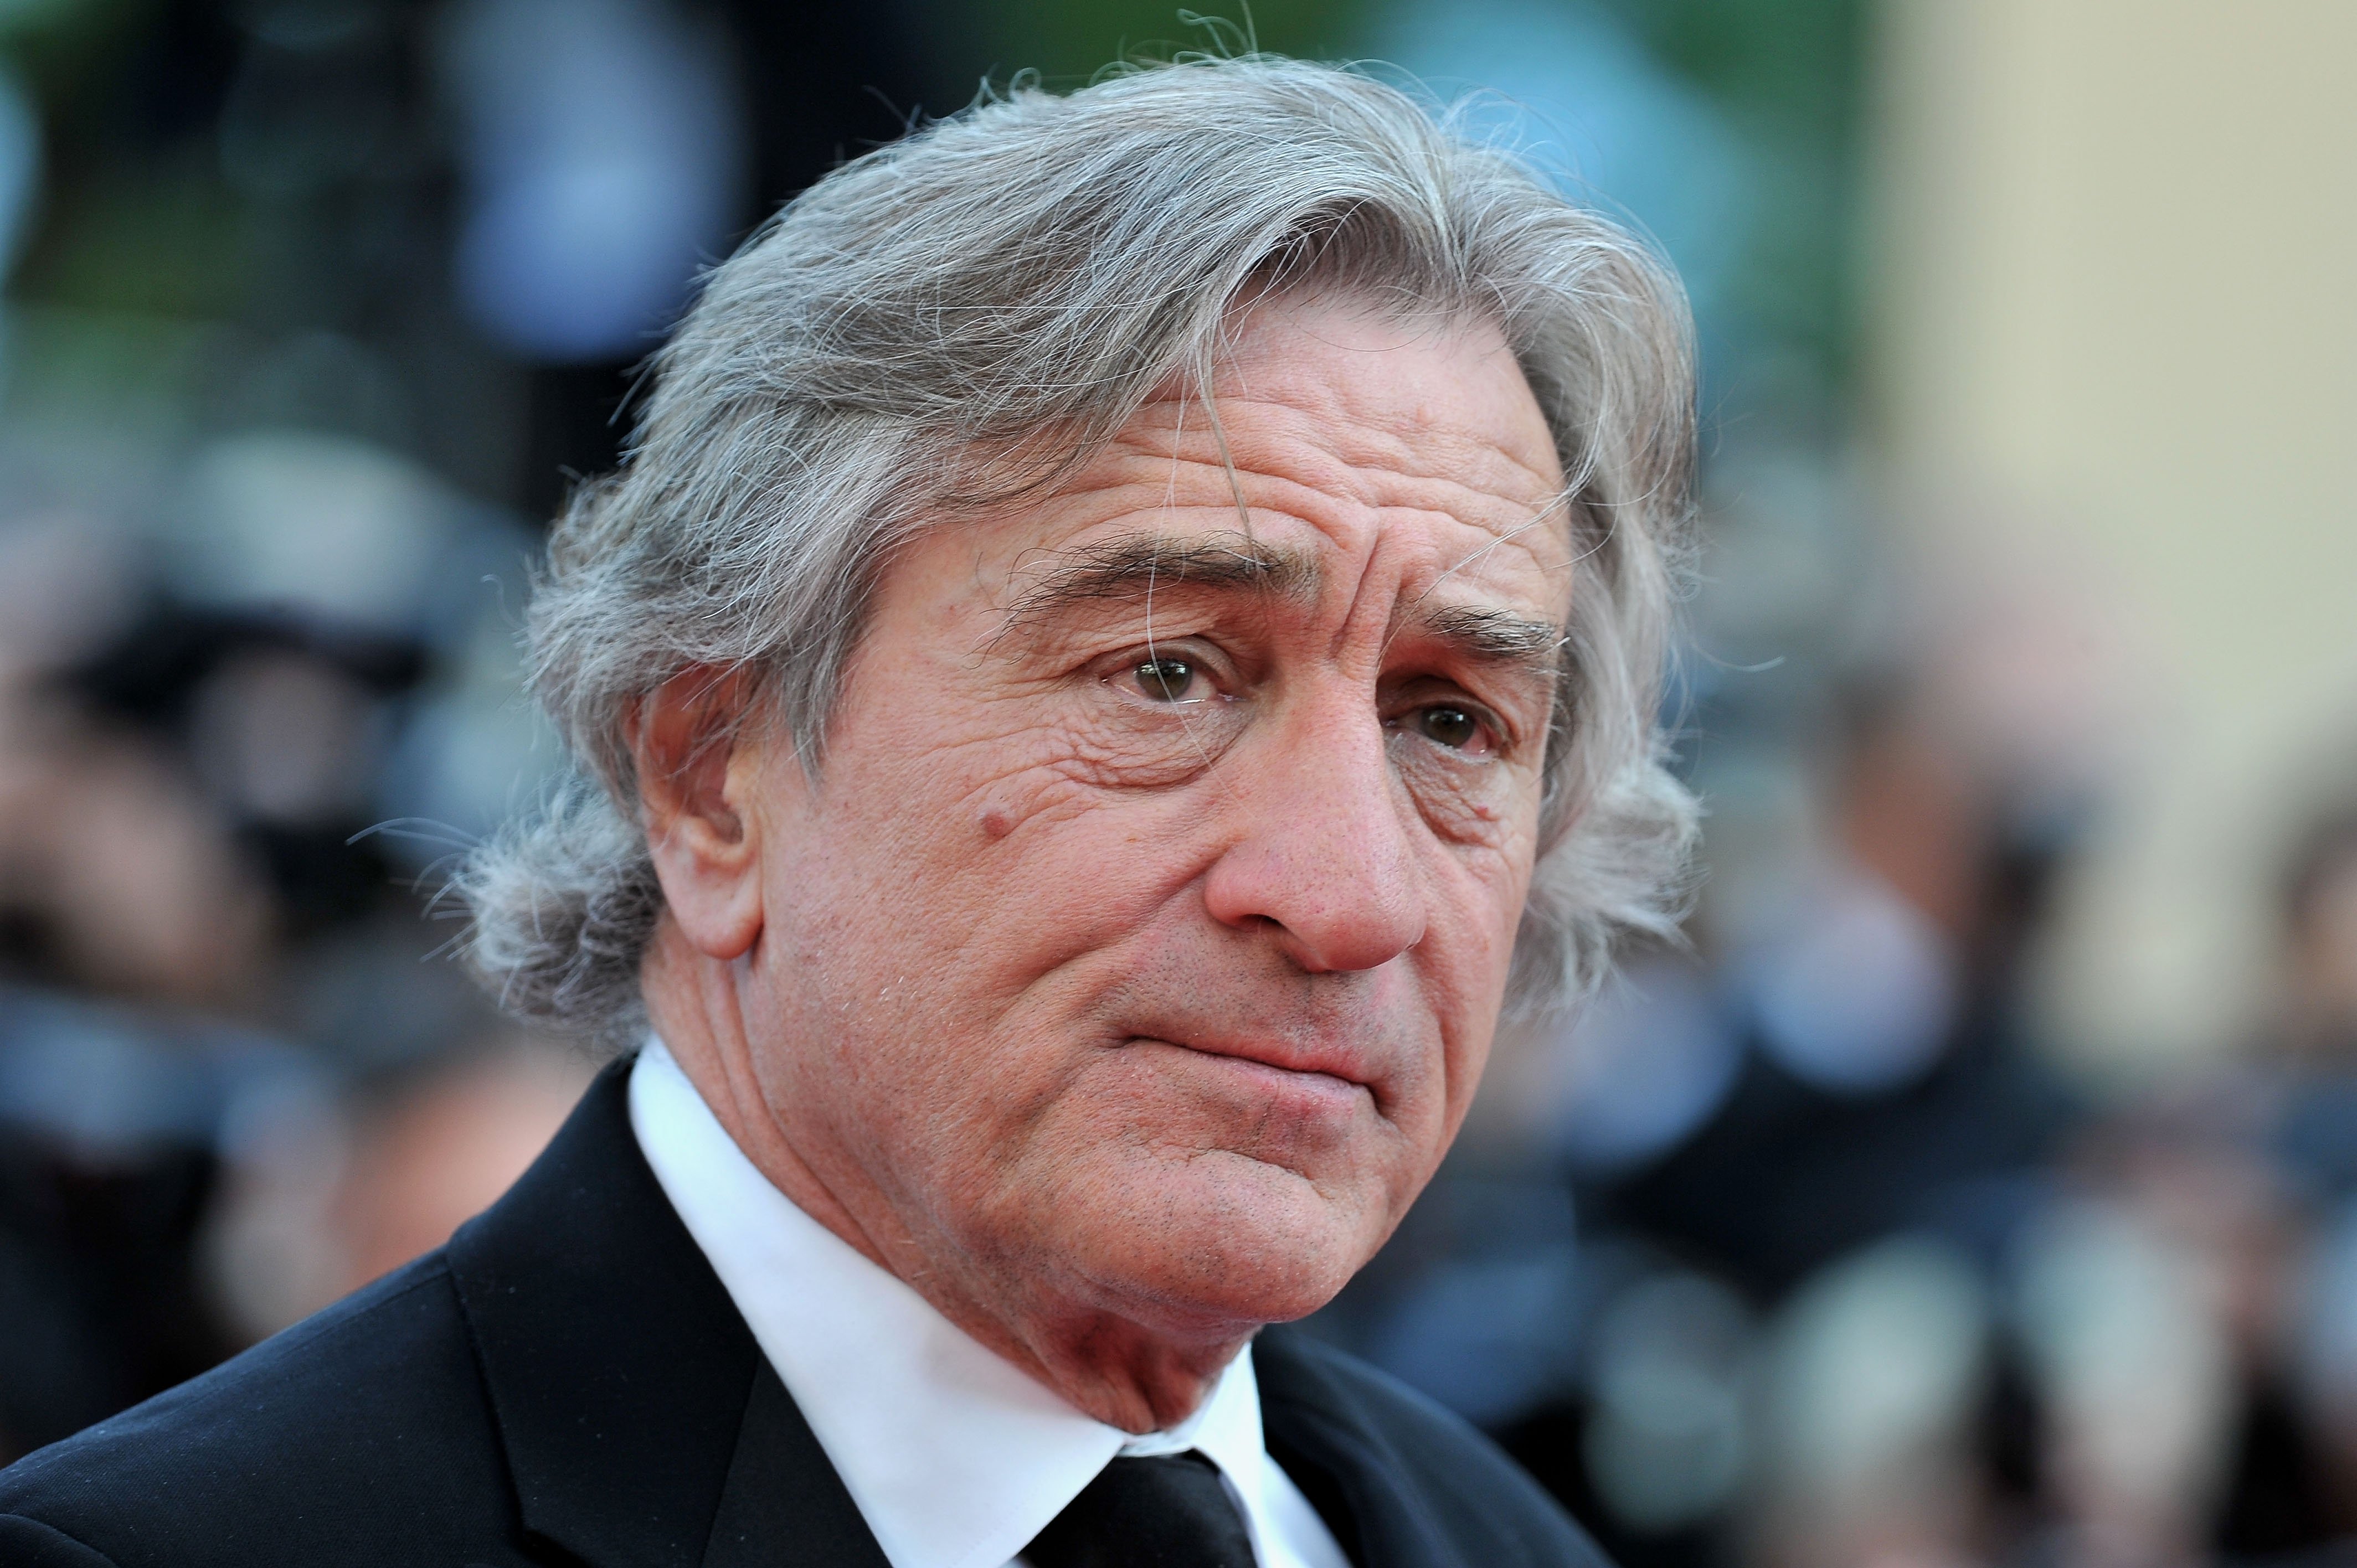 Robert De Niro attends the "Once Upon A Time" Premiere during 65th Annual Cannes Film Festival during at Palais des Festivals on May 18, 2012 in Cannes, France | Photo: Getty Images